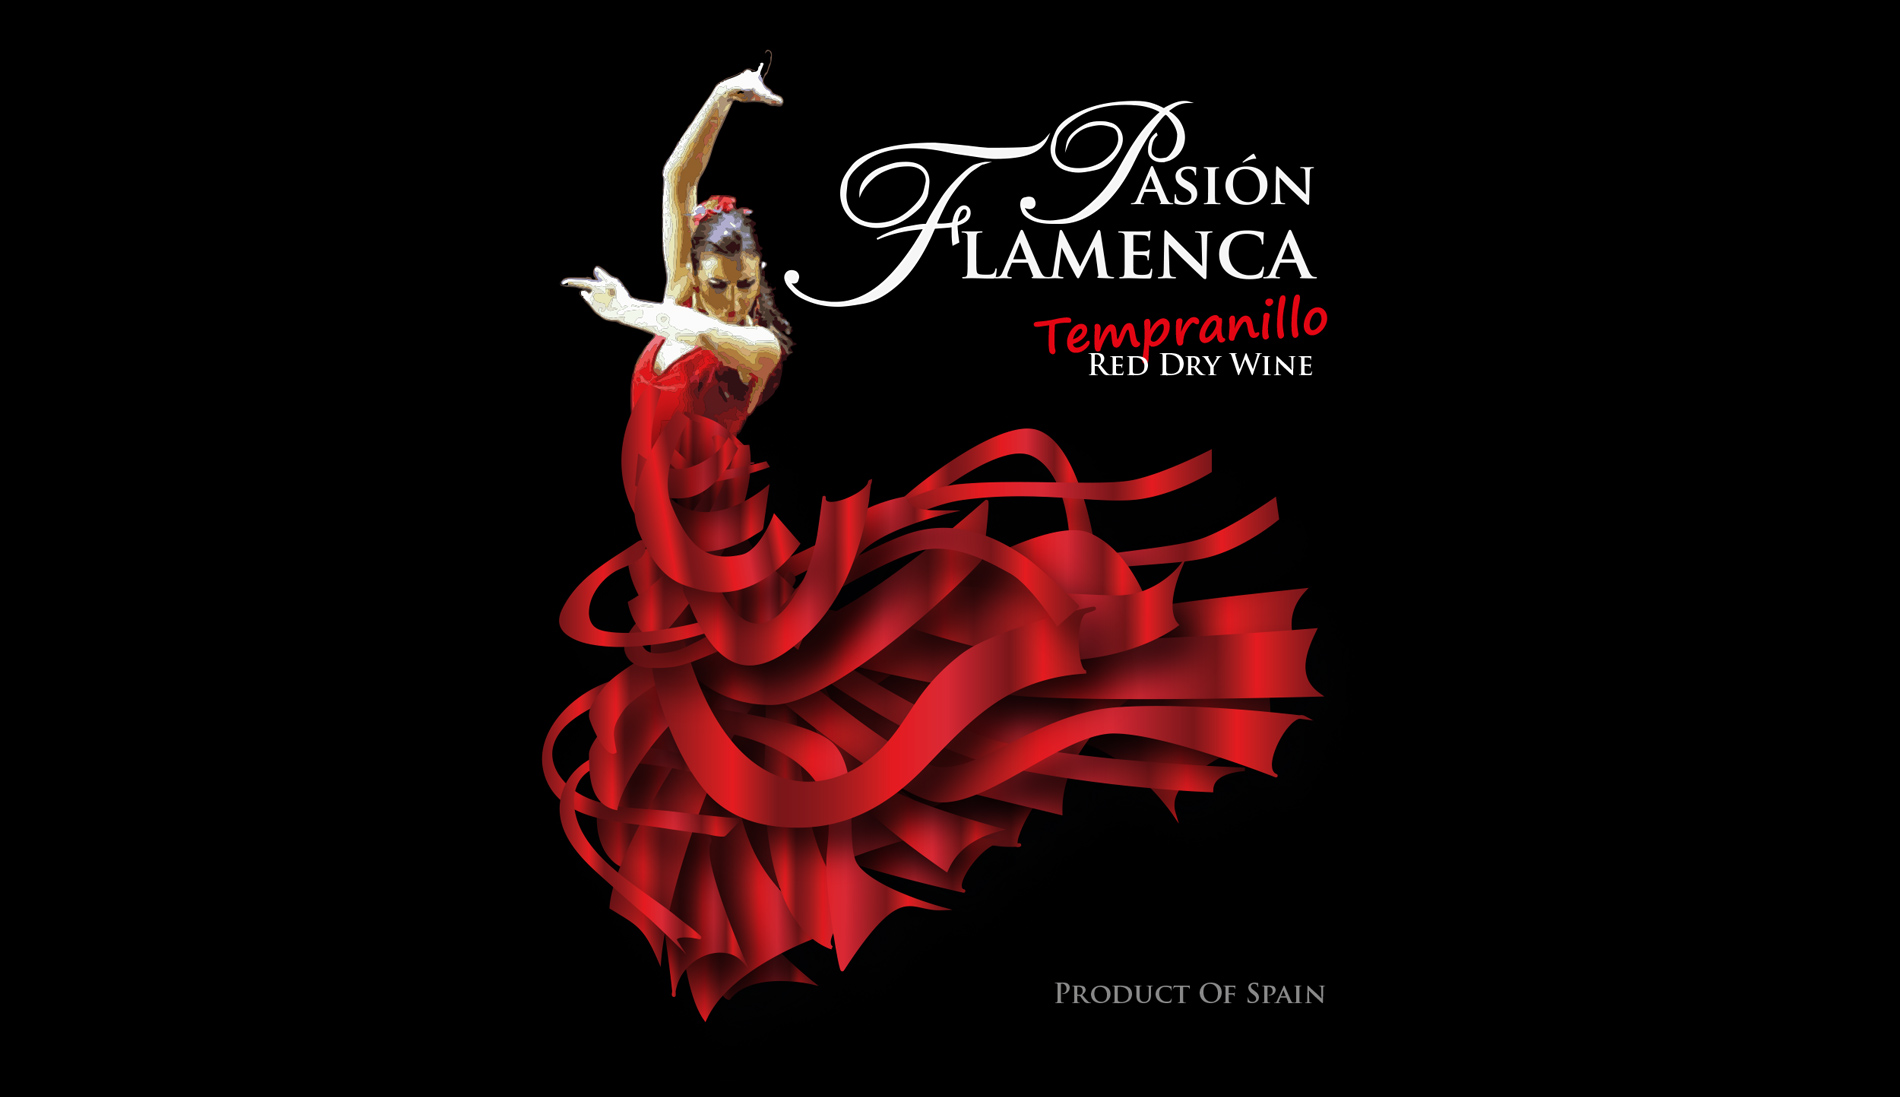 Portfolio of graphic and creative design labels and packaging for Spanish wine cellar - PASIÓN FLAMENCA